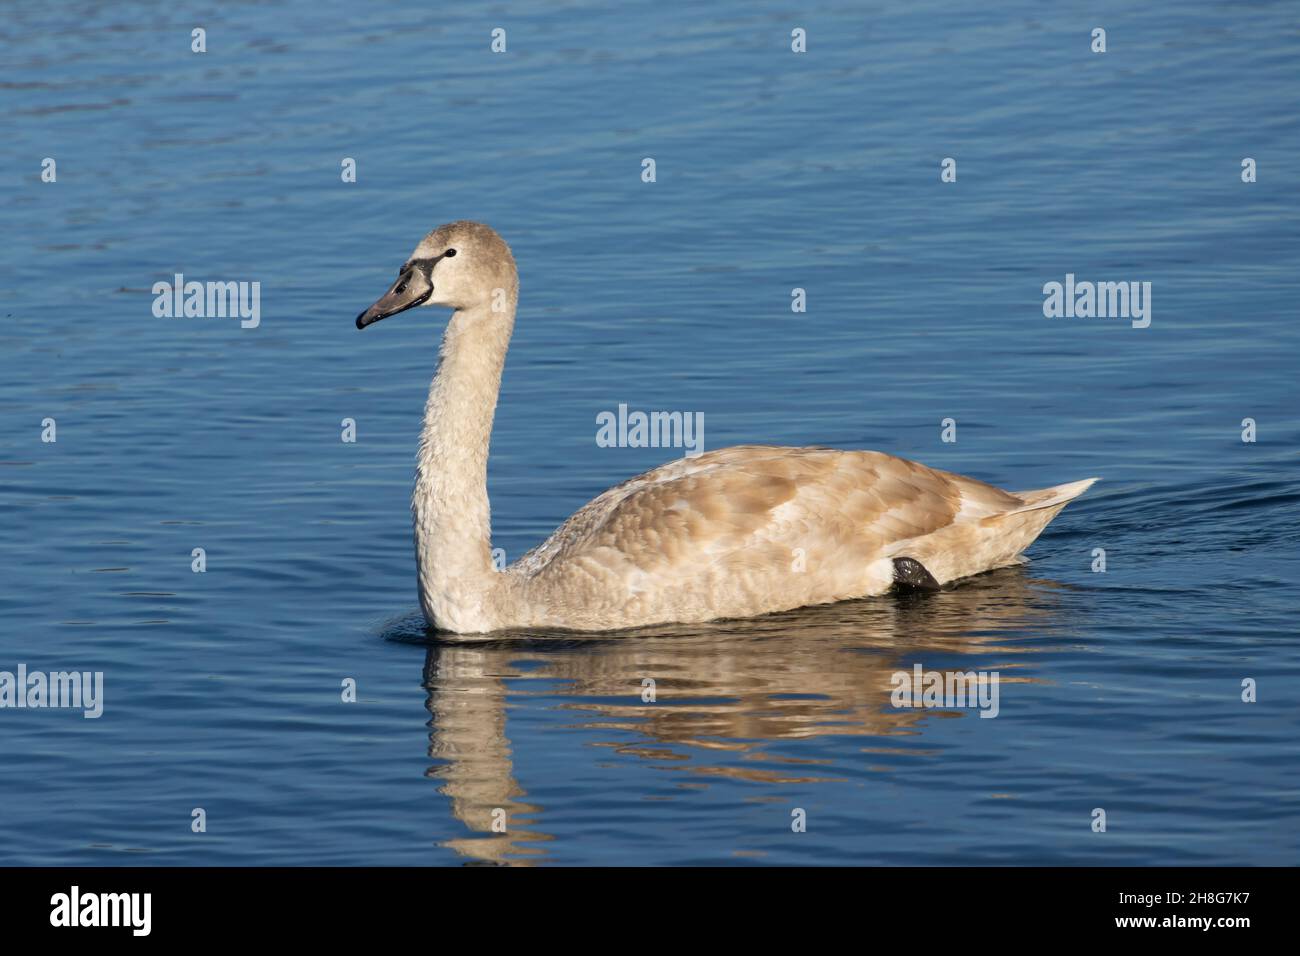 Young gray swan swimming on a lake Stock Photo